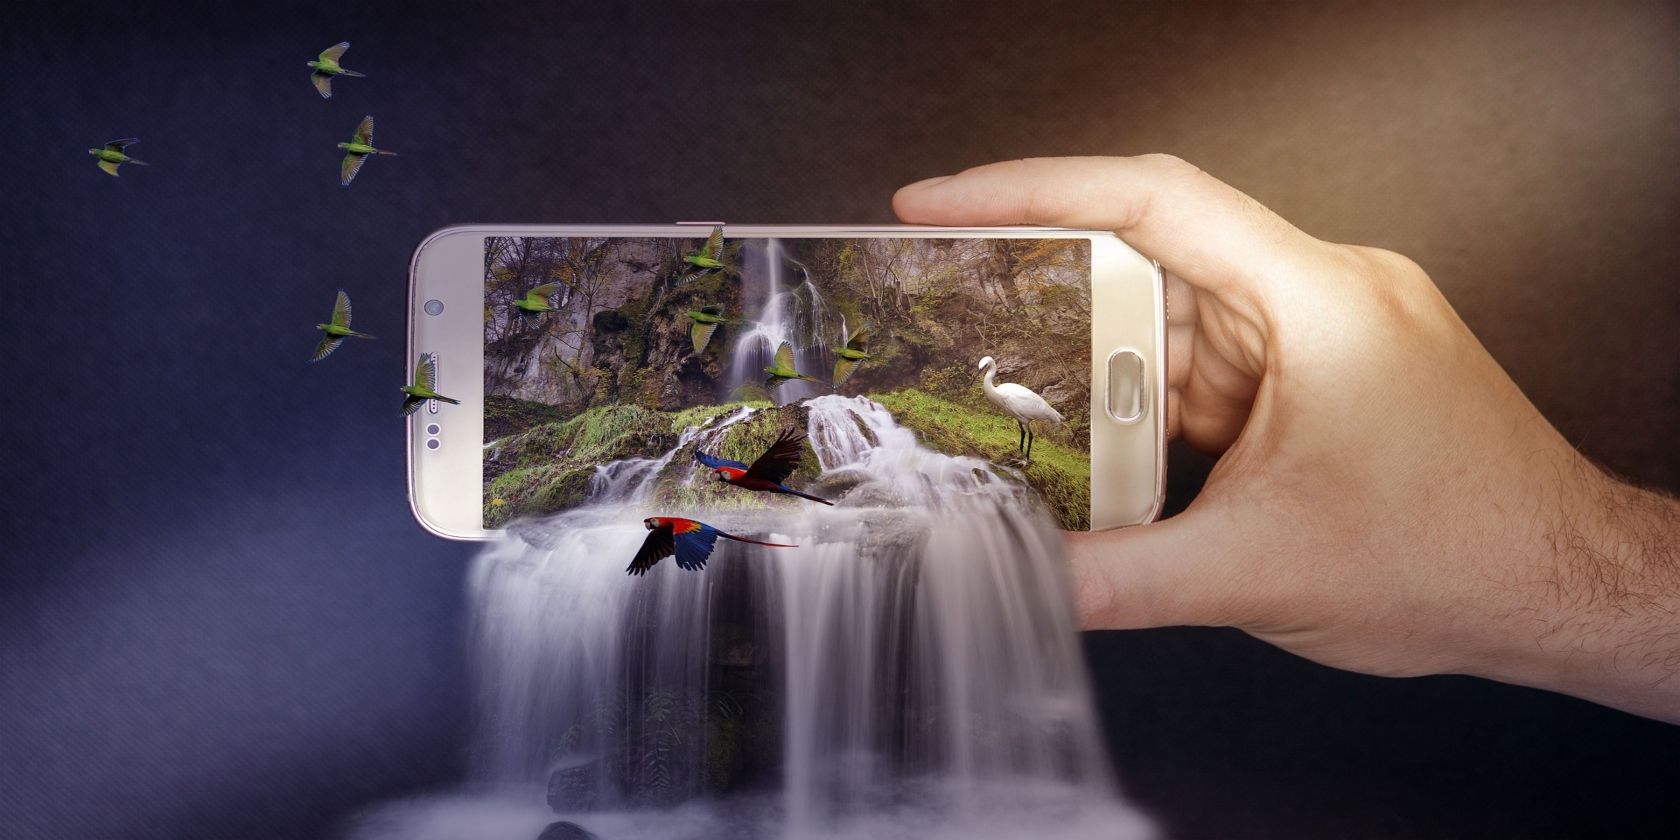 3D image of a waterfall